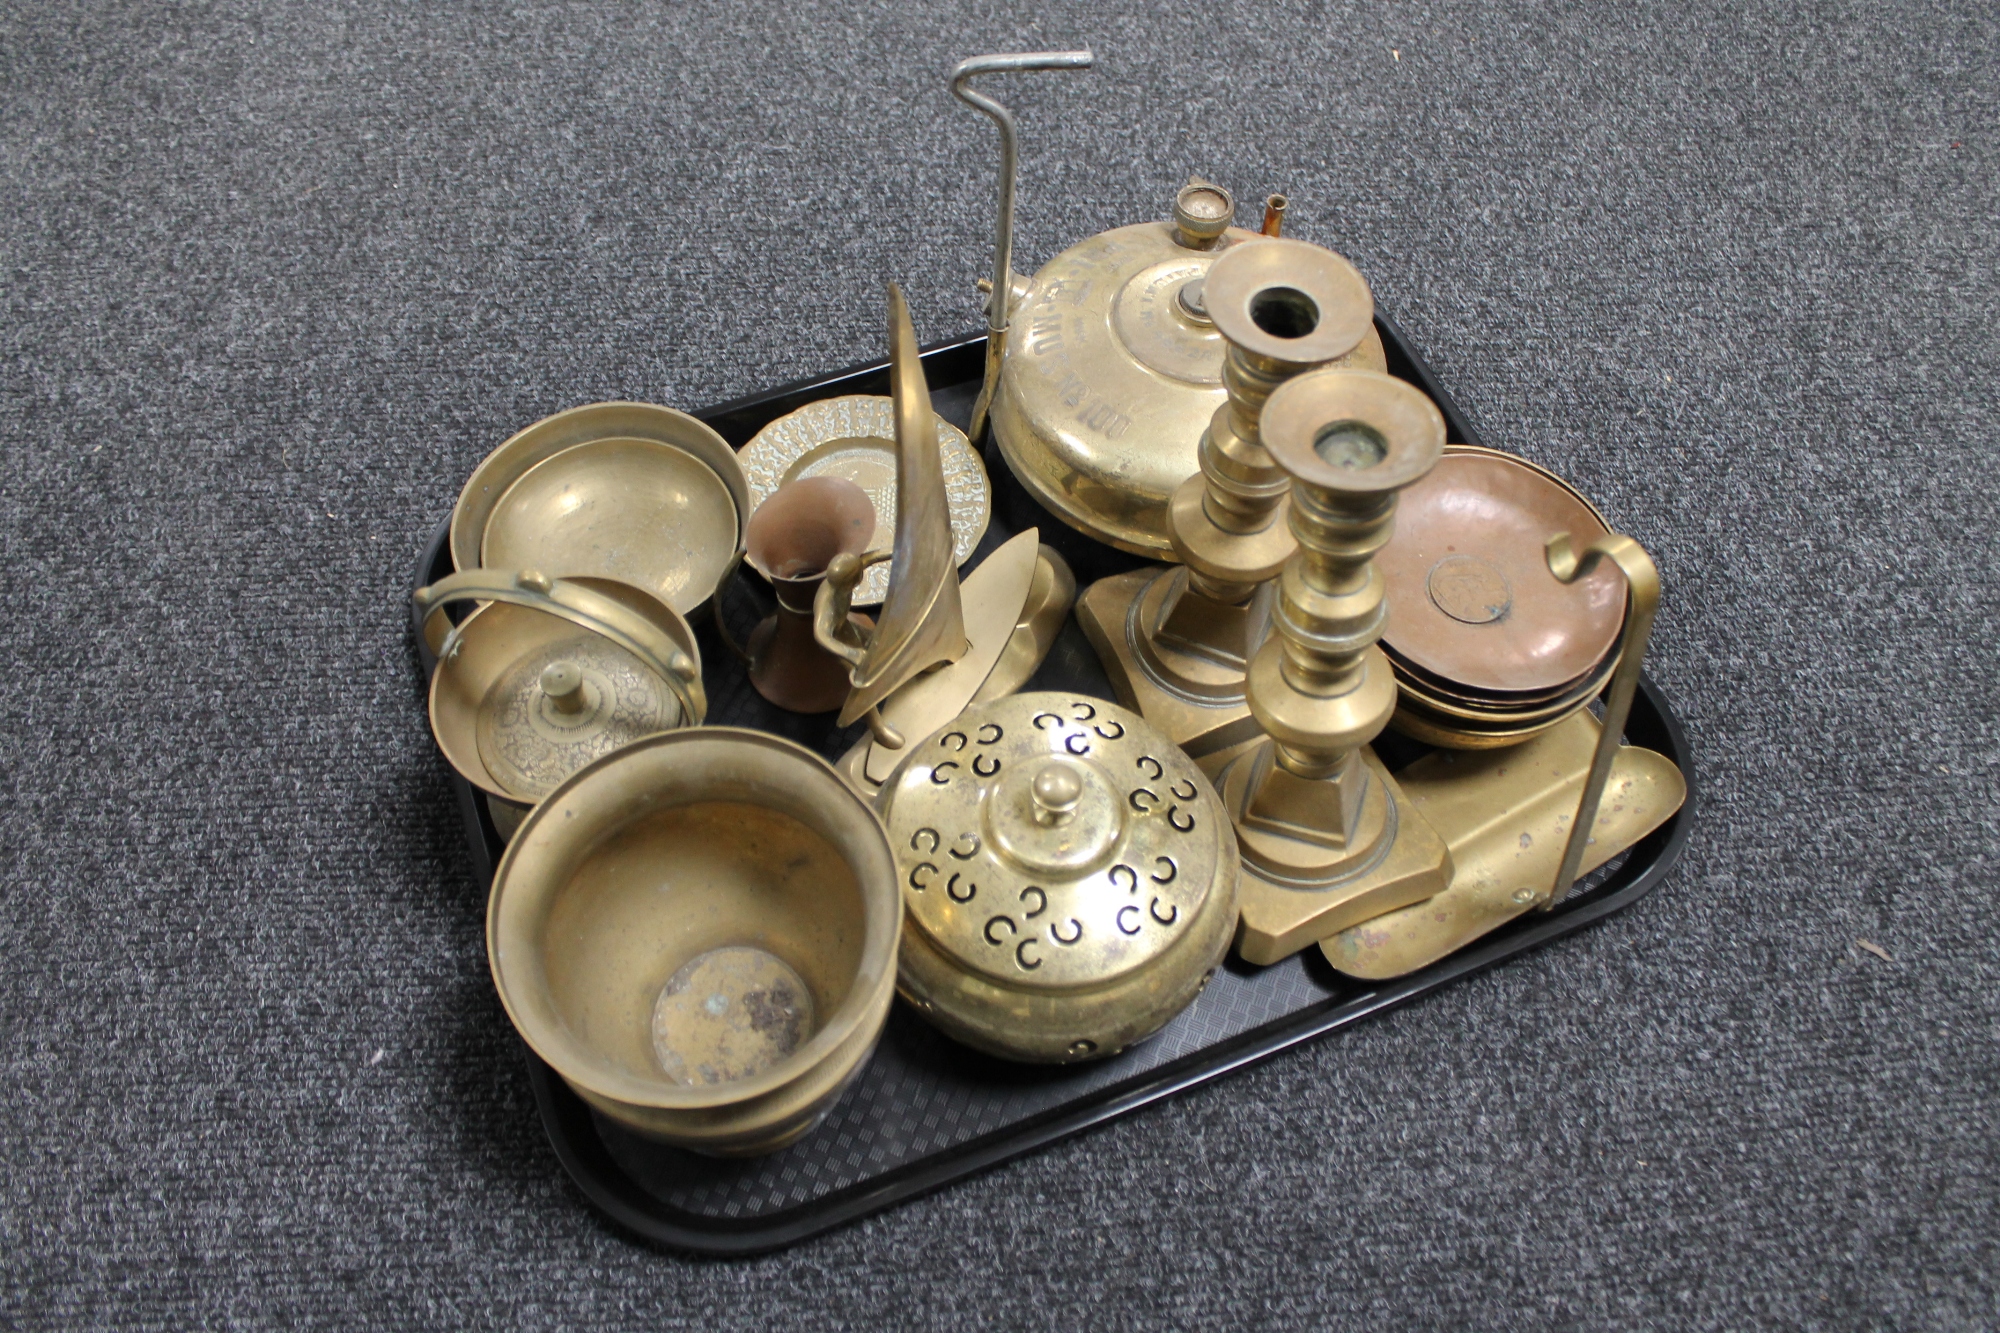 A tray of antique and later brass ware, Primus stove, lidded pot, brass wind surfer figure,